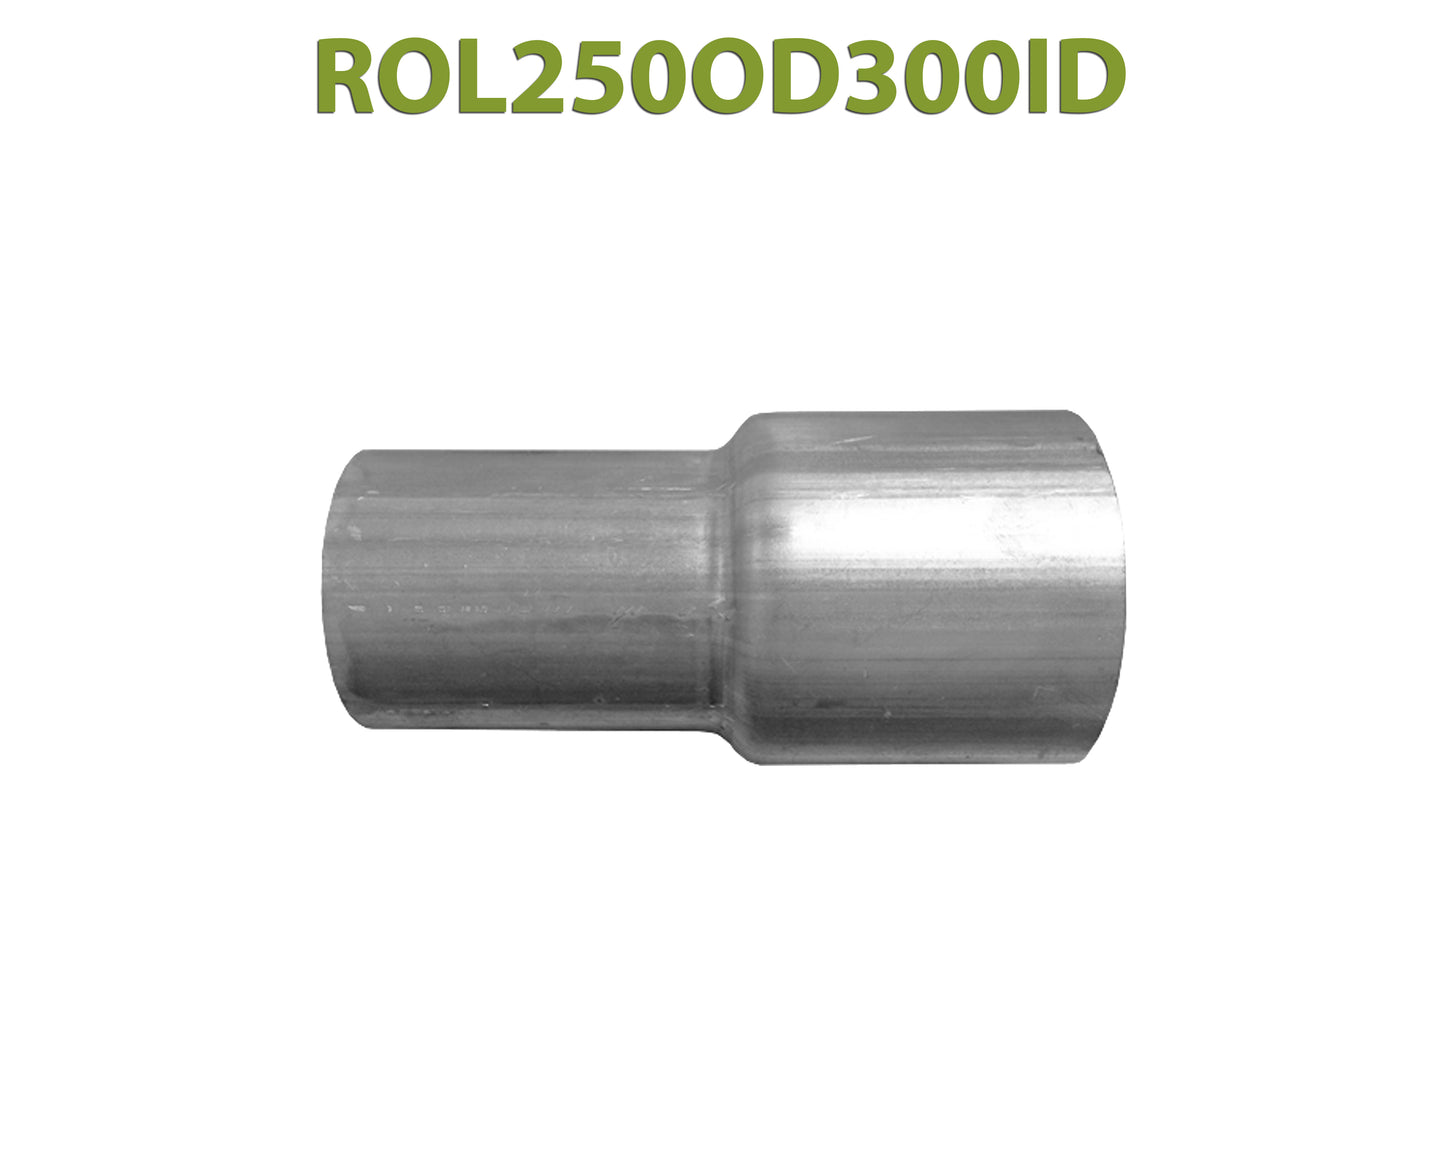 ROL250OD300ID 617571 2 1/2” OD to 3” ID Universal Exhaust Component to Pipe Adapter Reducer